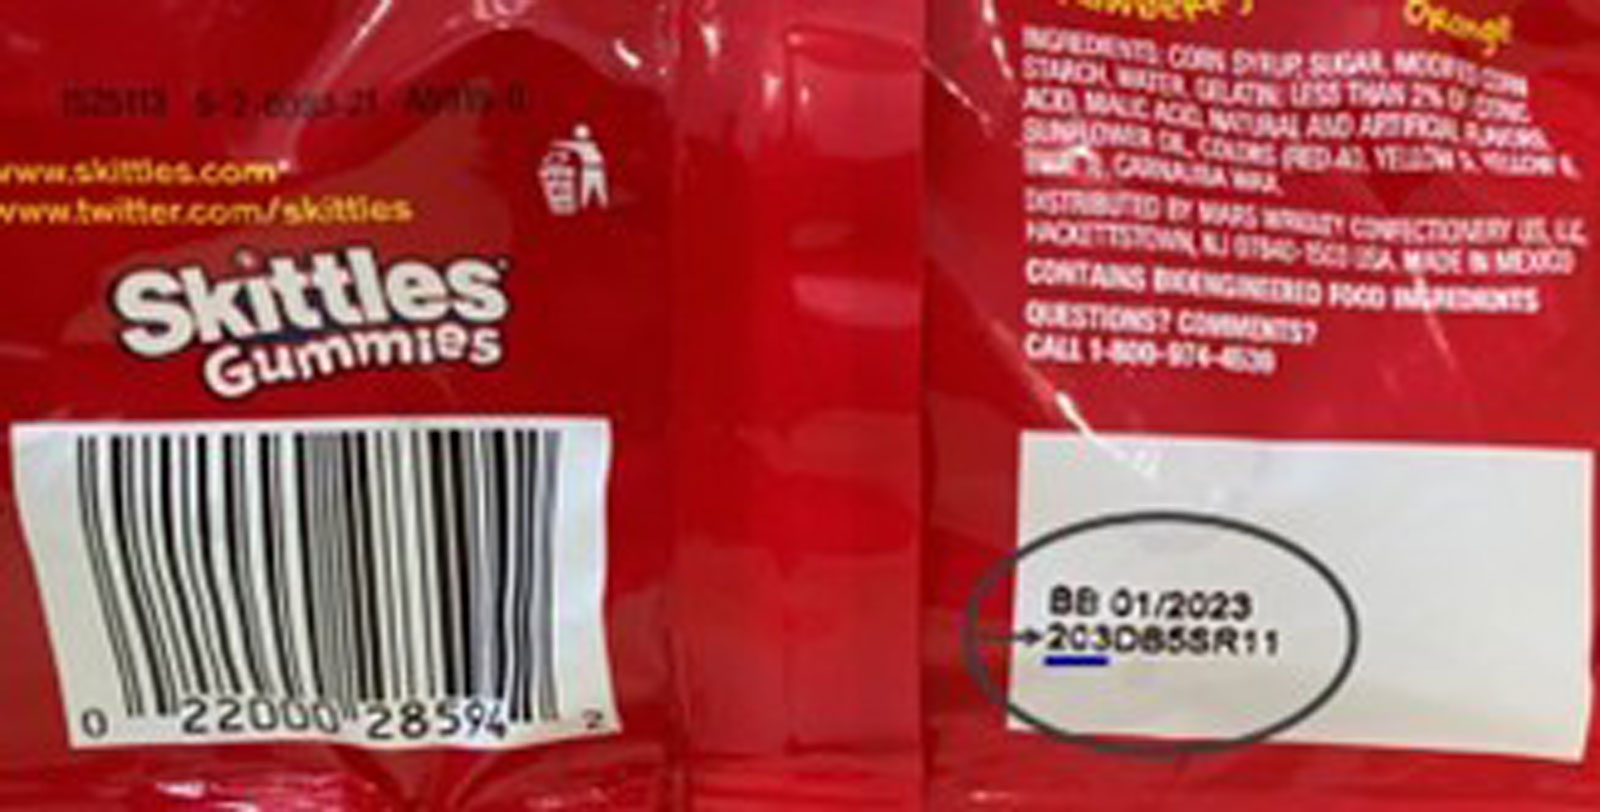 Varieties Of Starburst, Skittles And Life Savers Gummies Recalled Over Concerns Of Thin Metal Strands In Candy, Loose In Bag – CBS Philly